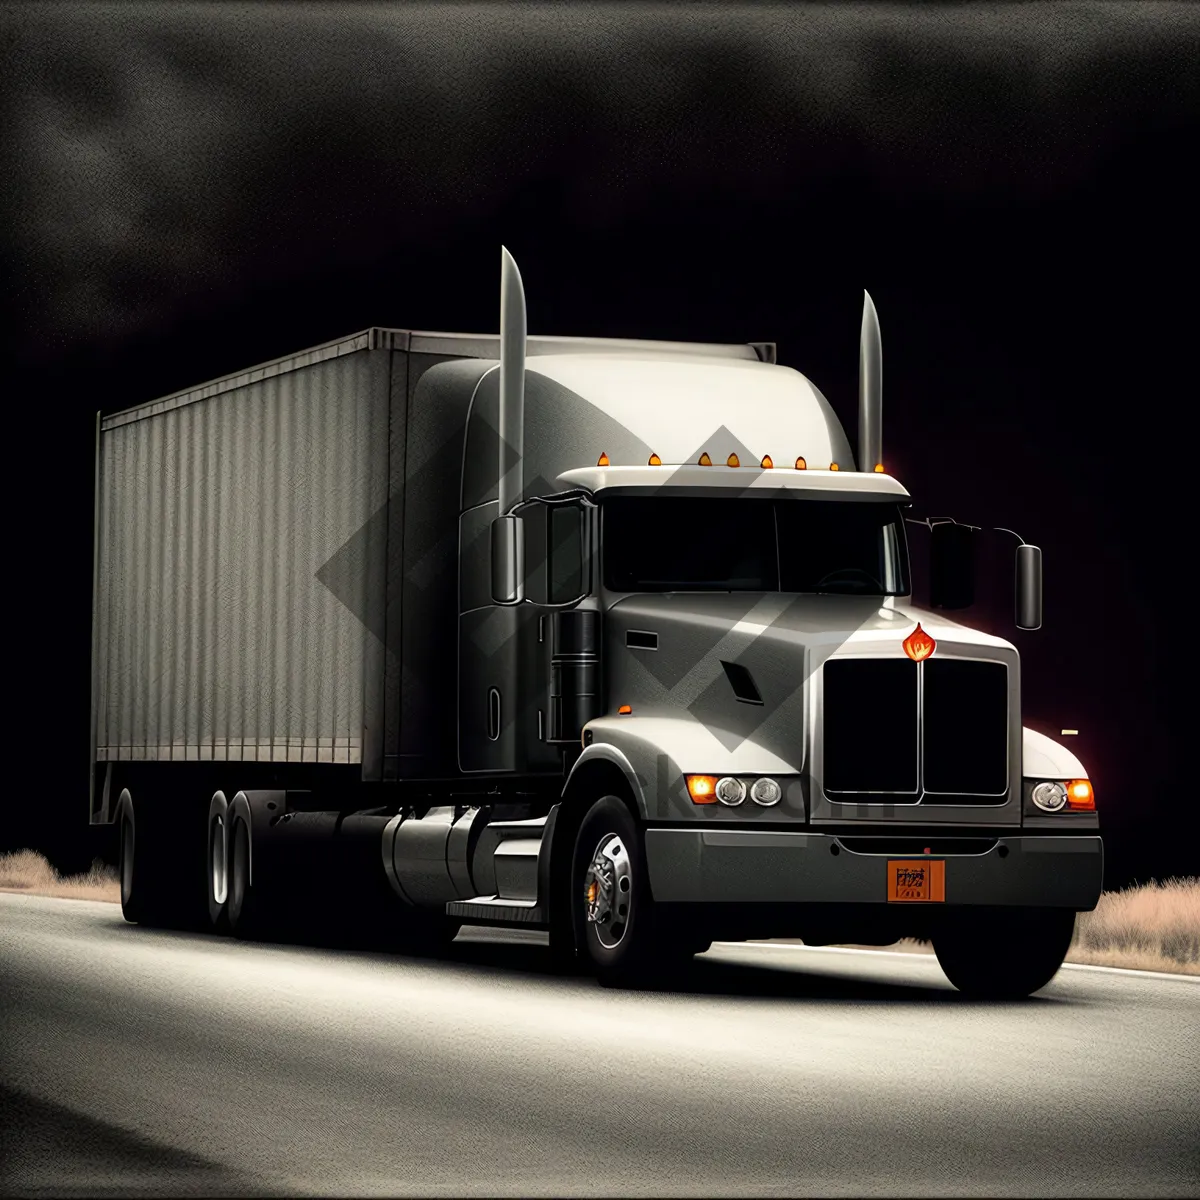 Picture of Trucking Transport - Efficient Freight Delivery on Highways